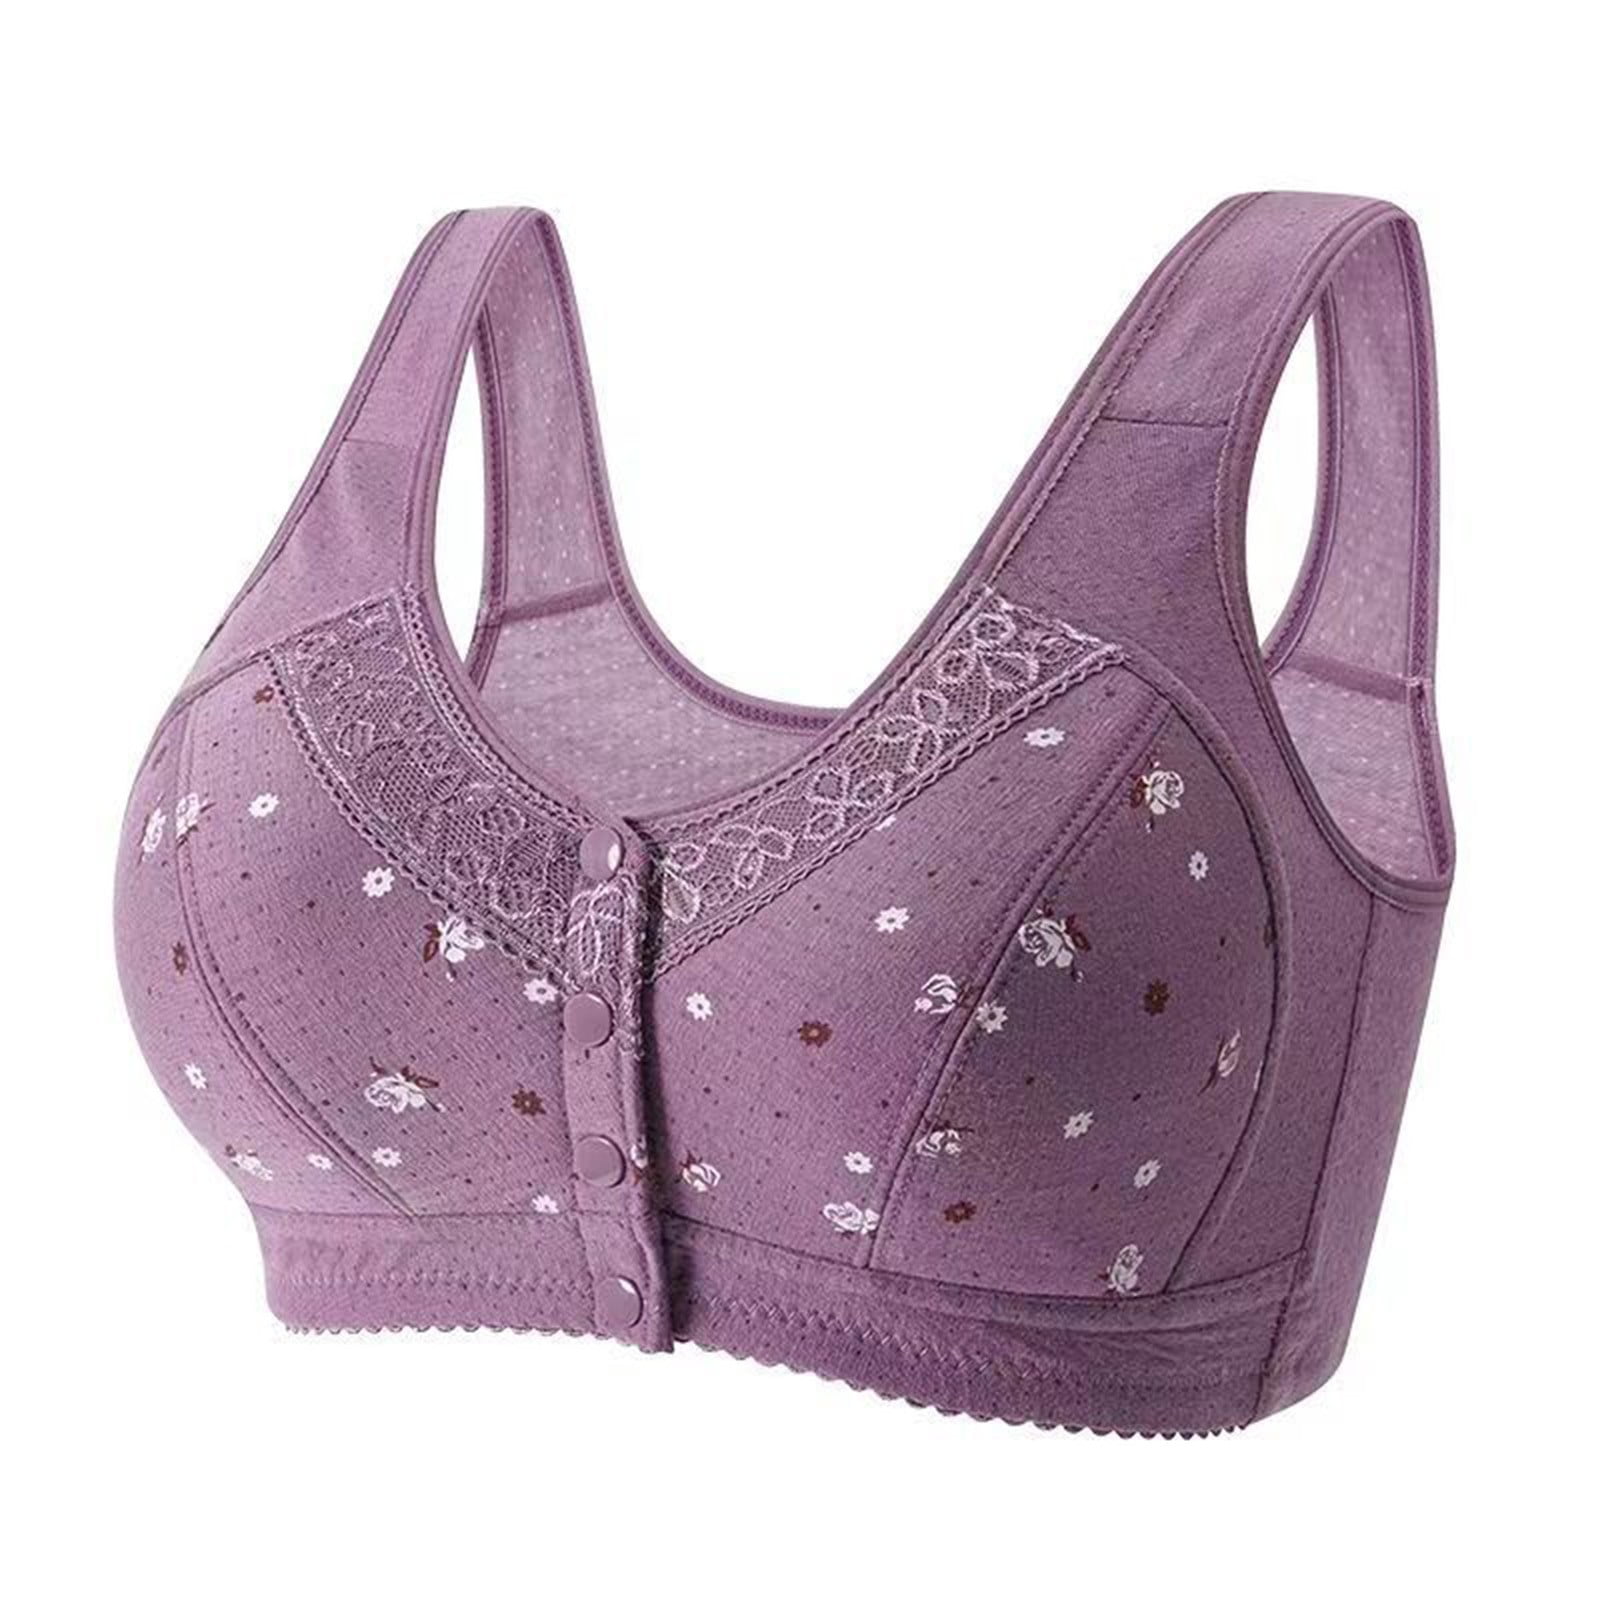 Daisy Bra, Women's Front Button Close Sports Bra with Lace, Front